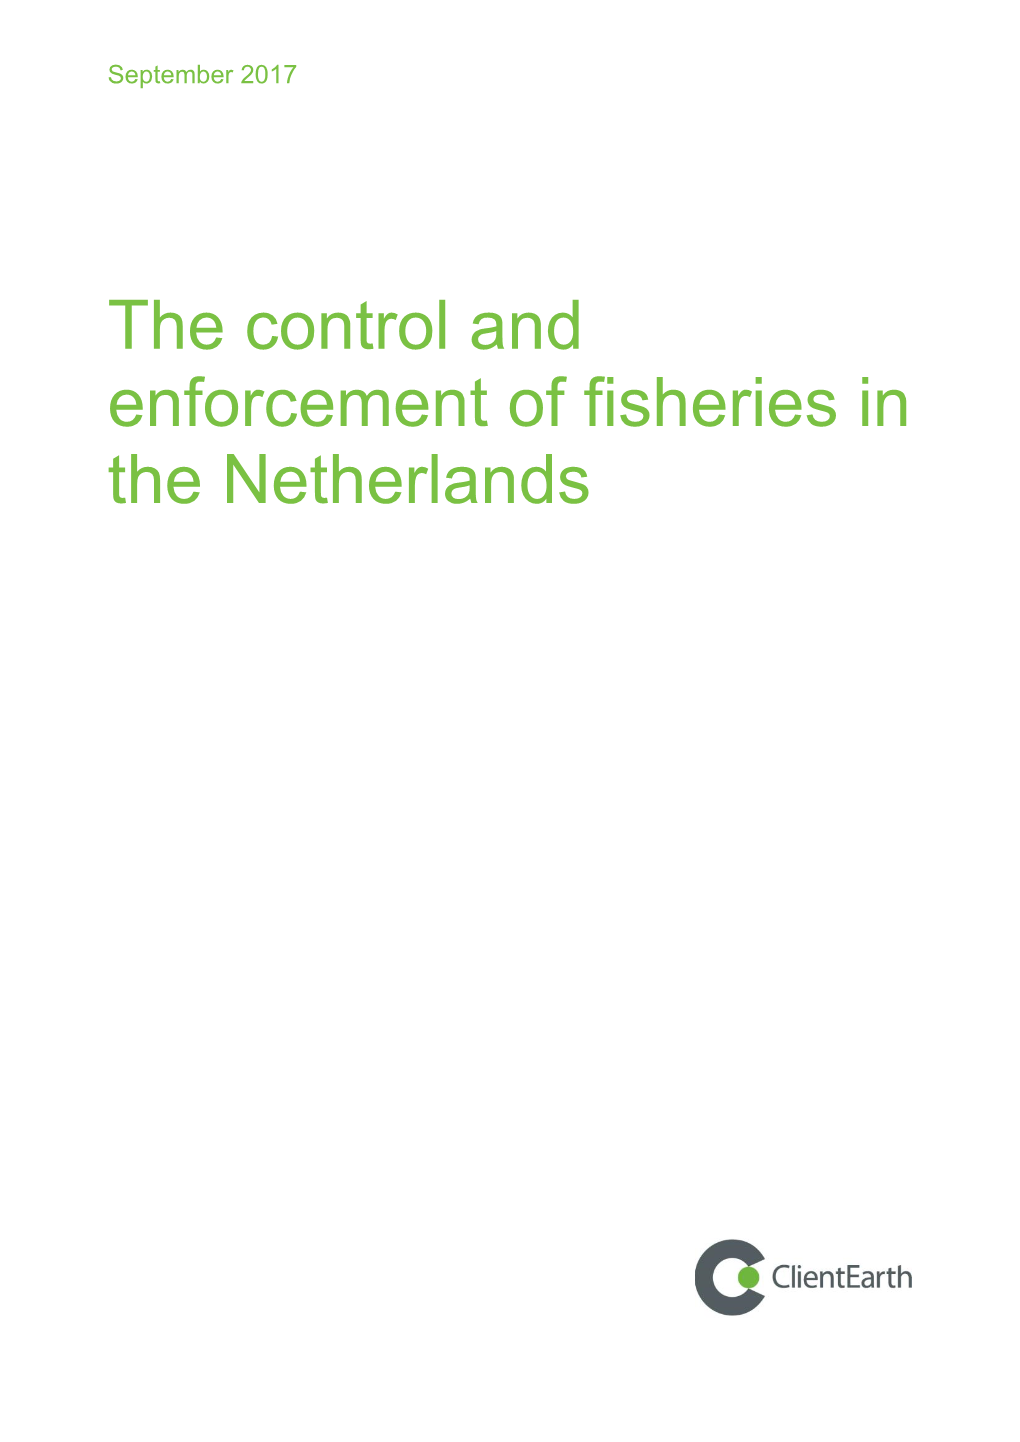 The Control and Enforcement of Fisheries in the Netherlands